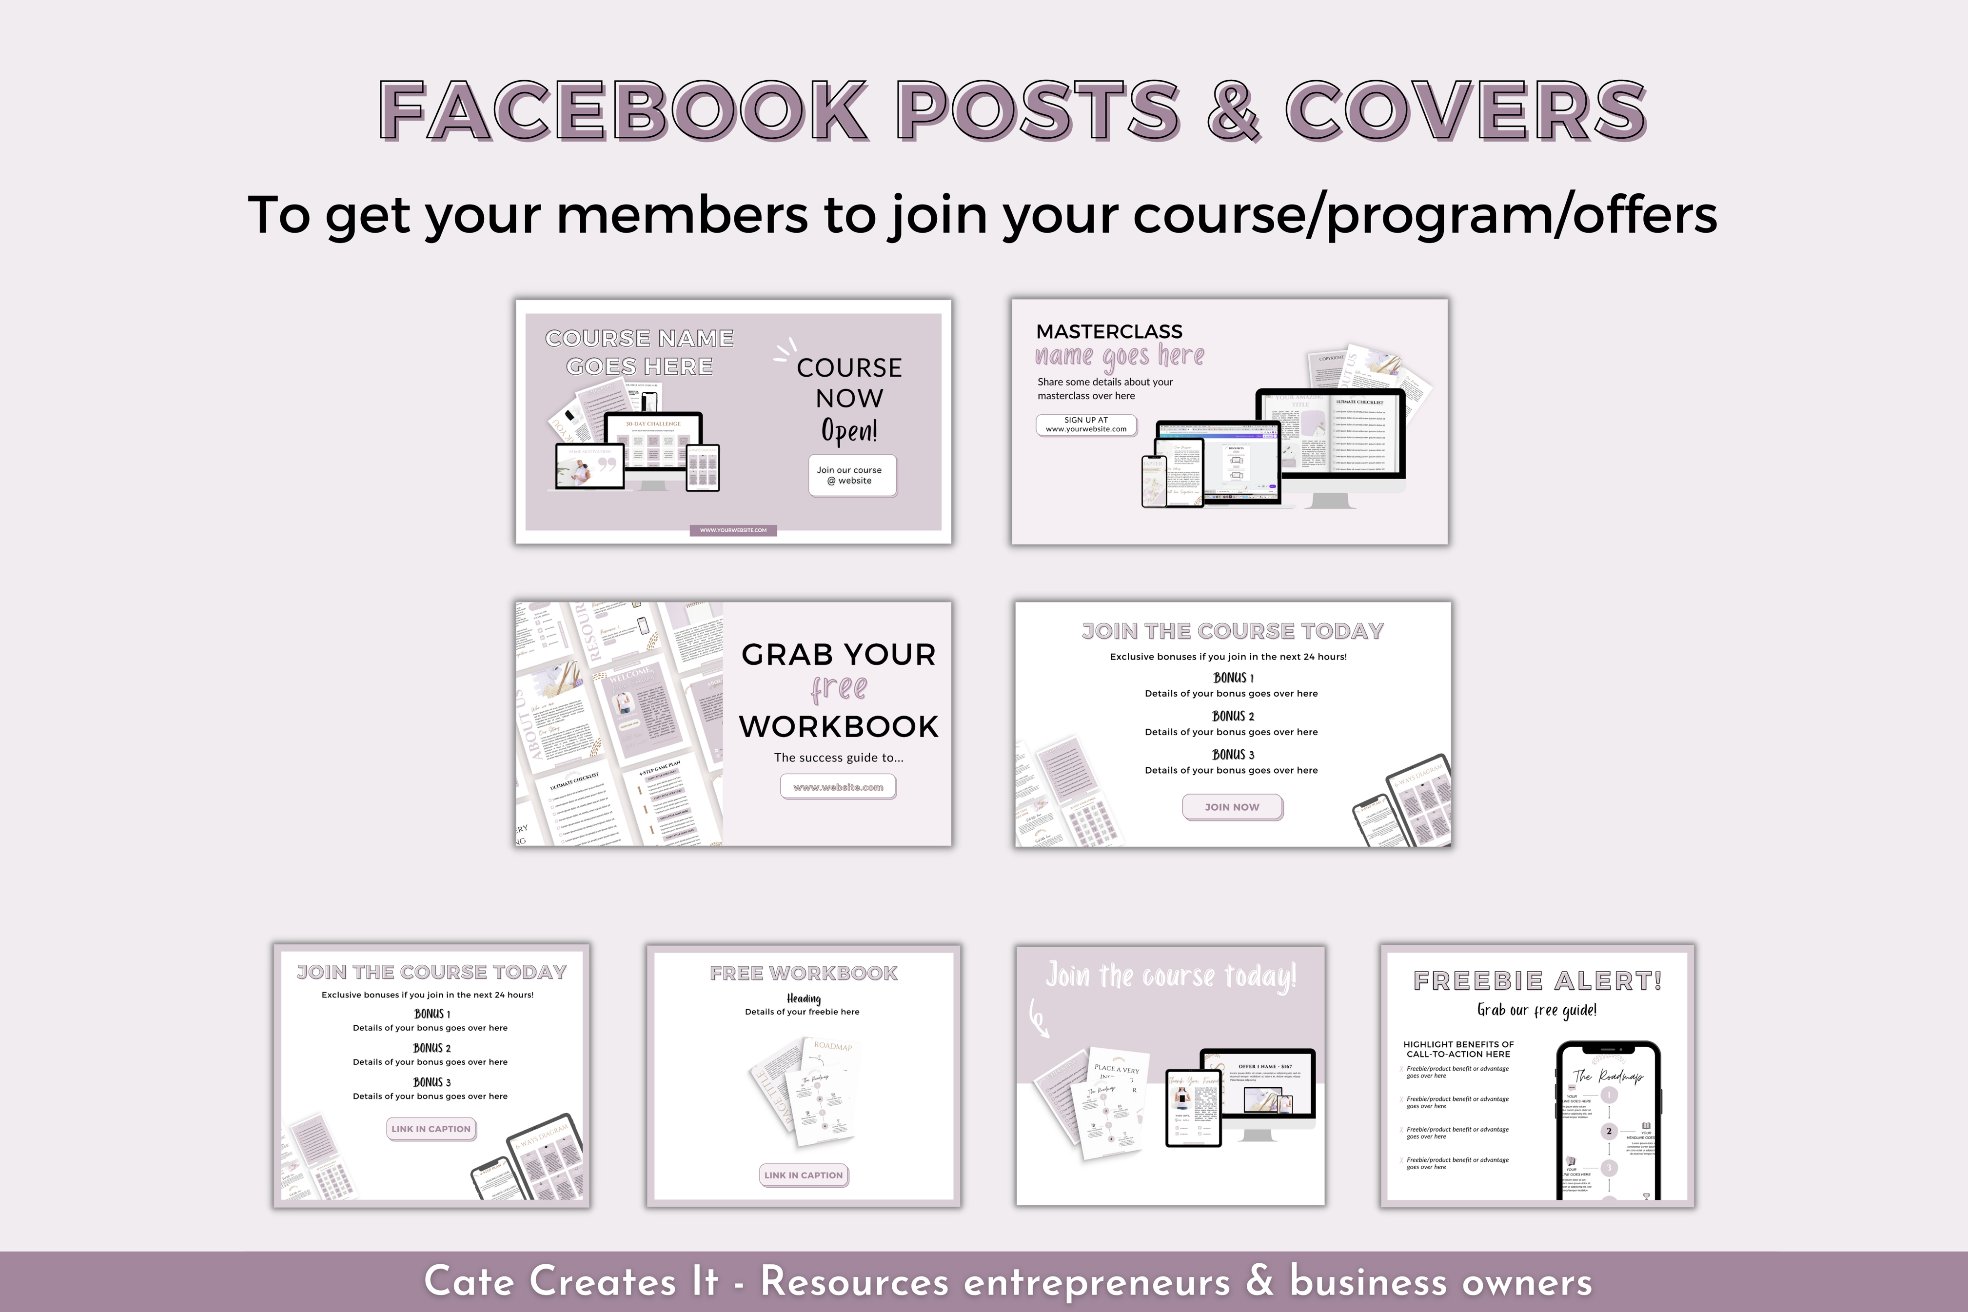 To get your member to join your course or offers.